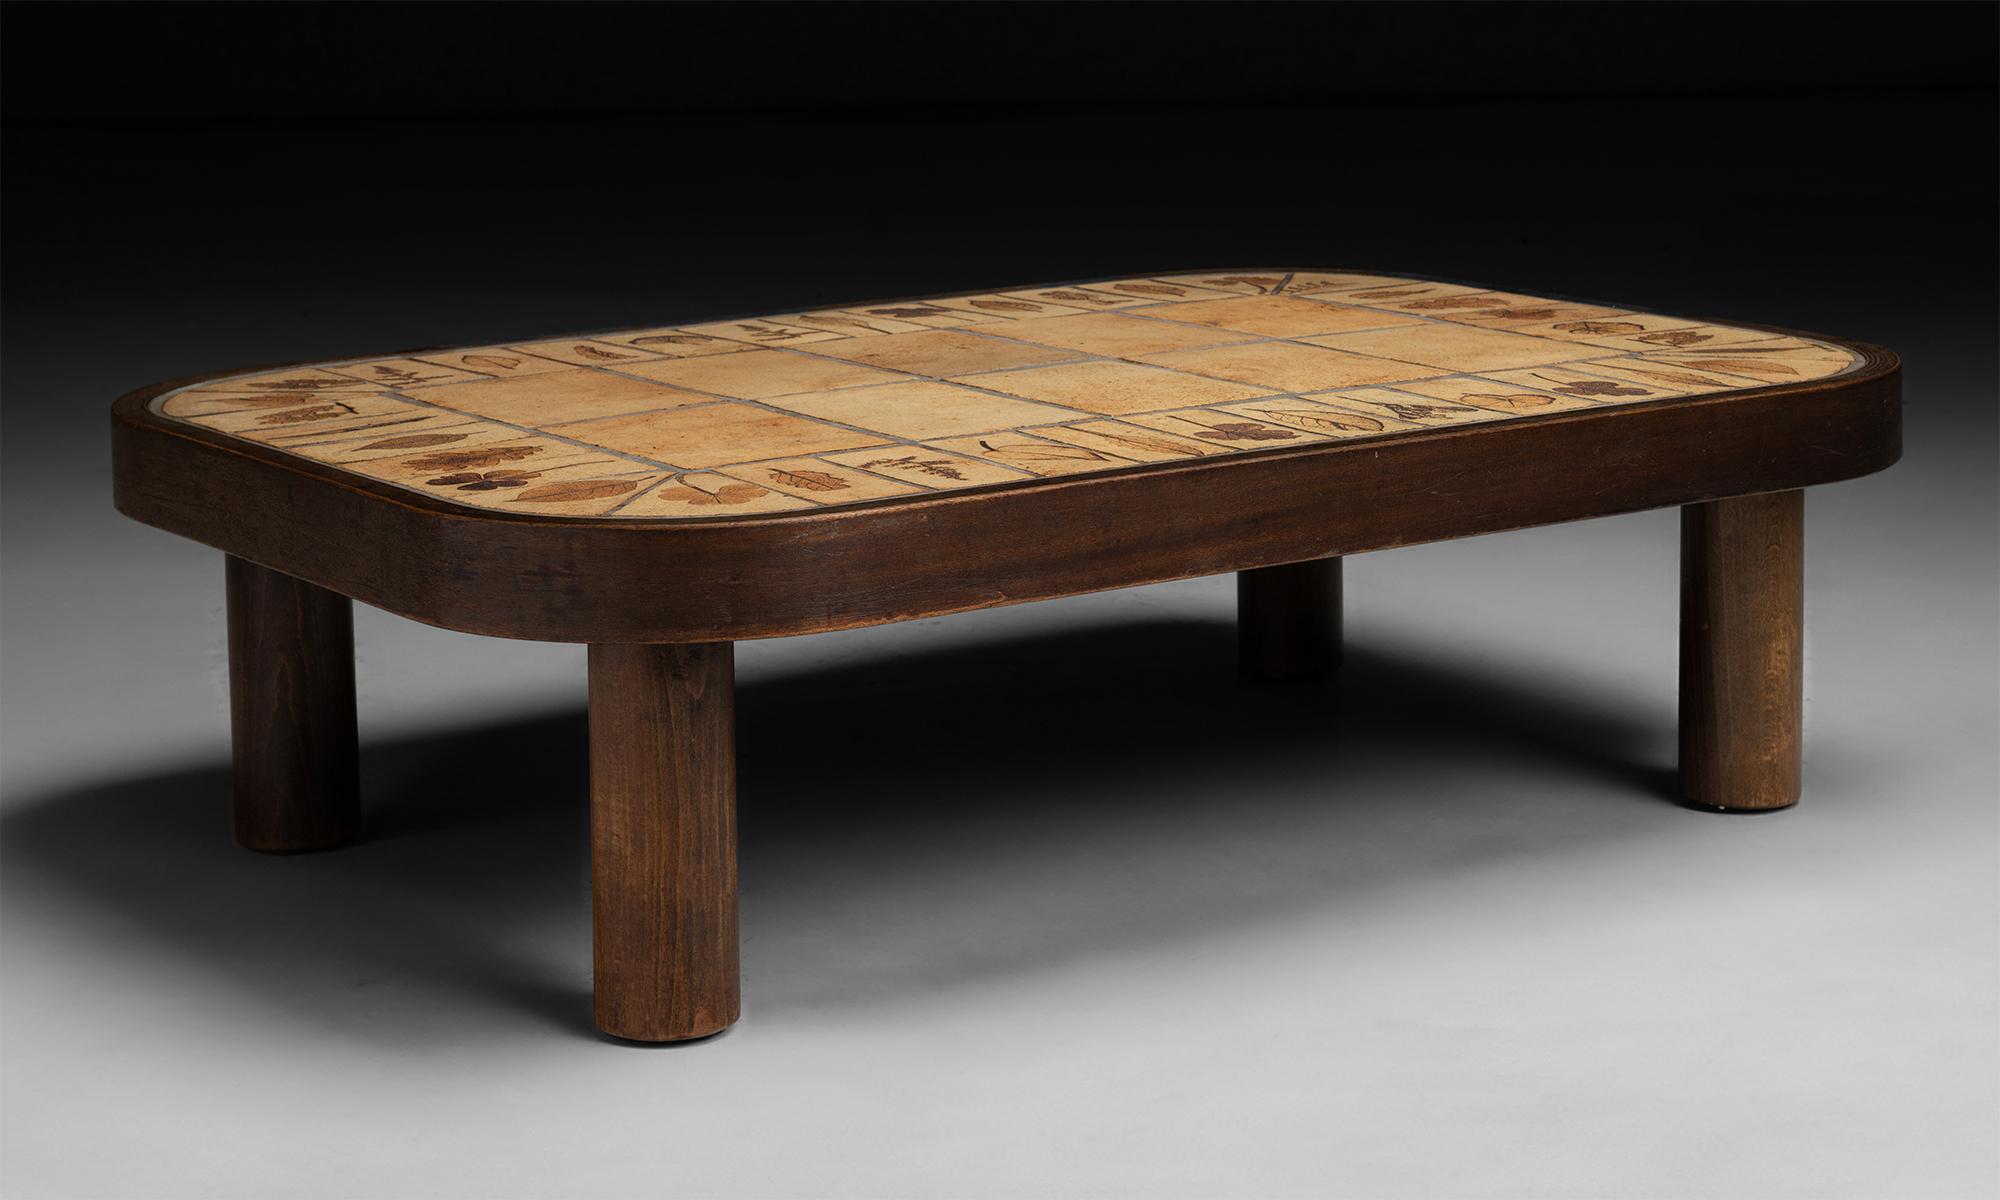 Roger Capron Coffee Table

France circa 1950

With stamped leaf impressions on tiles.

38.75”L x 27”d x 11”h